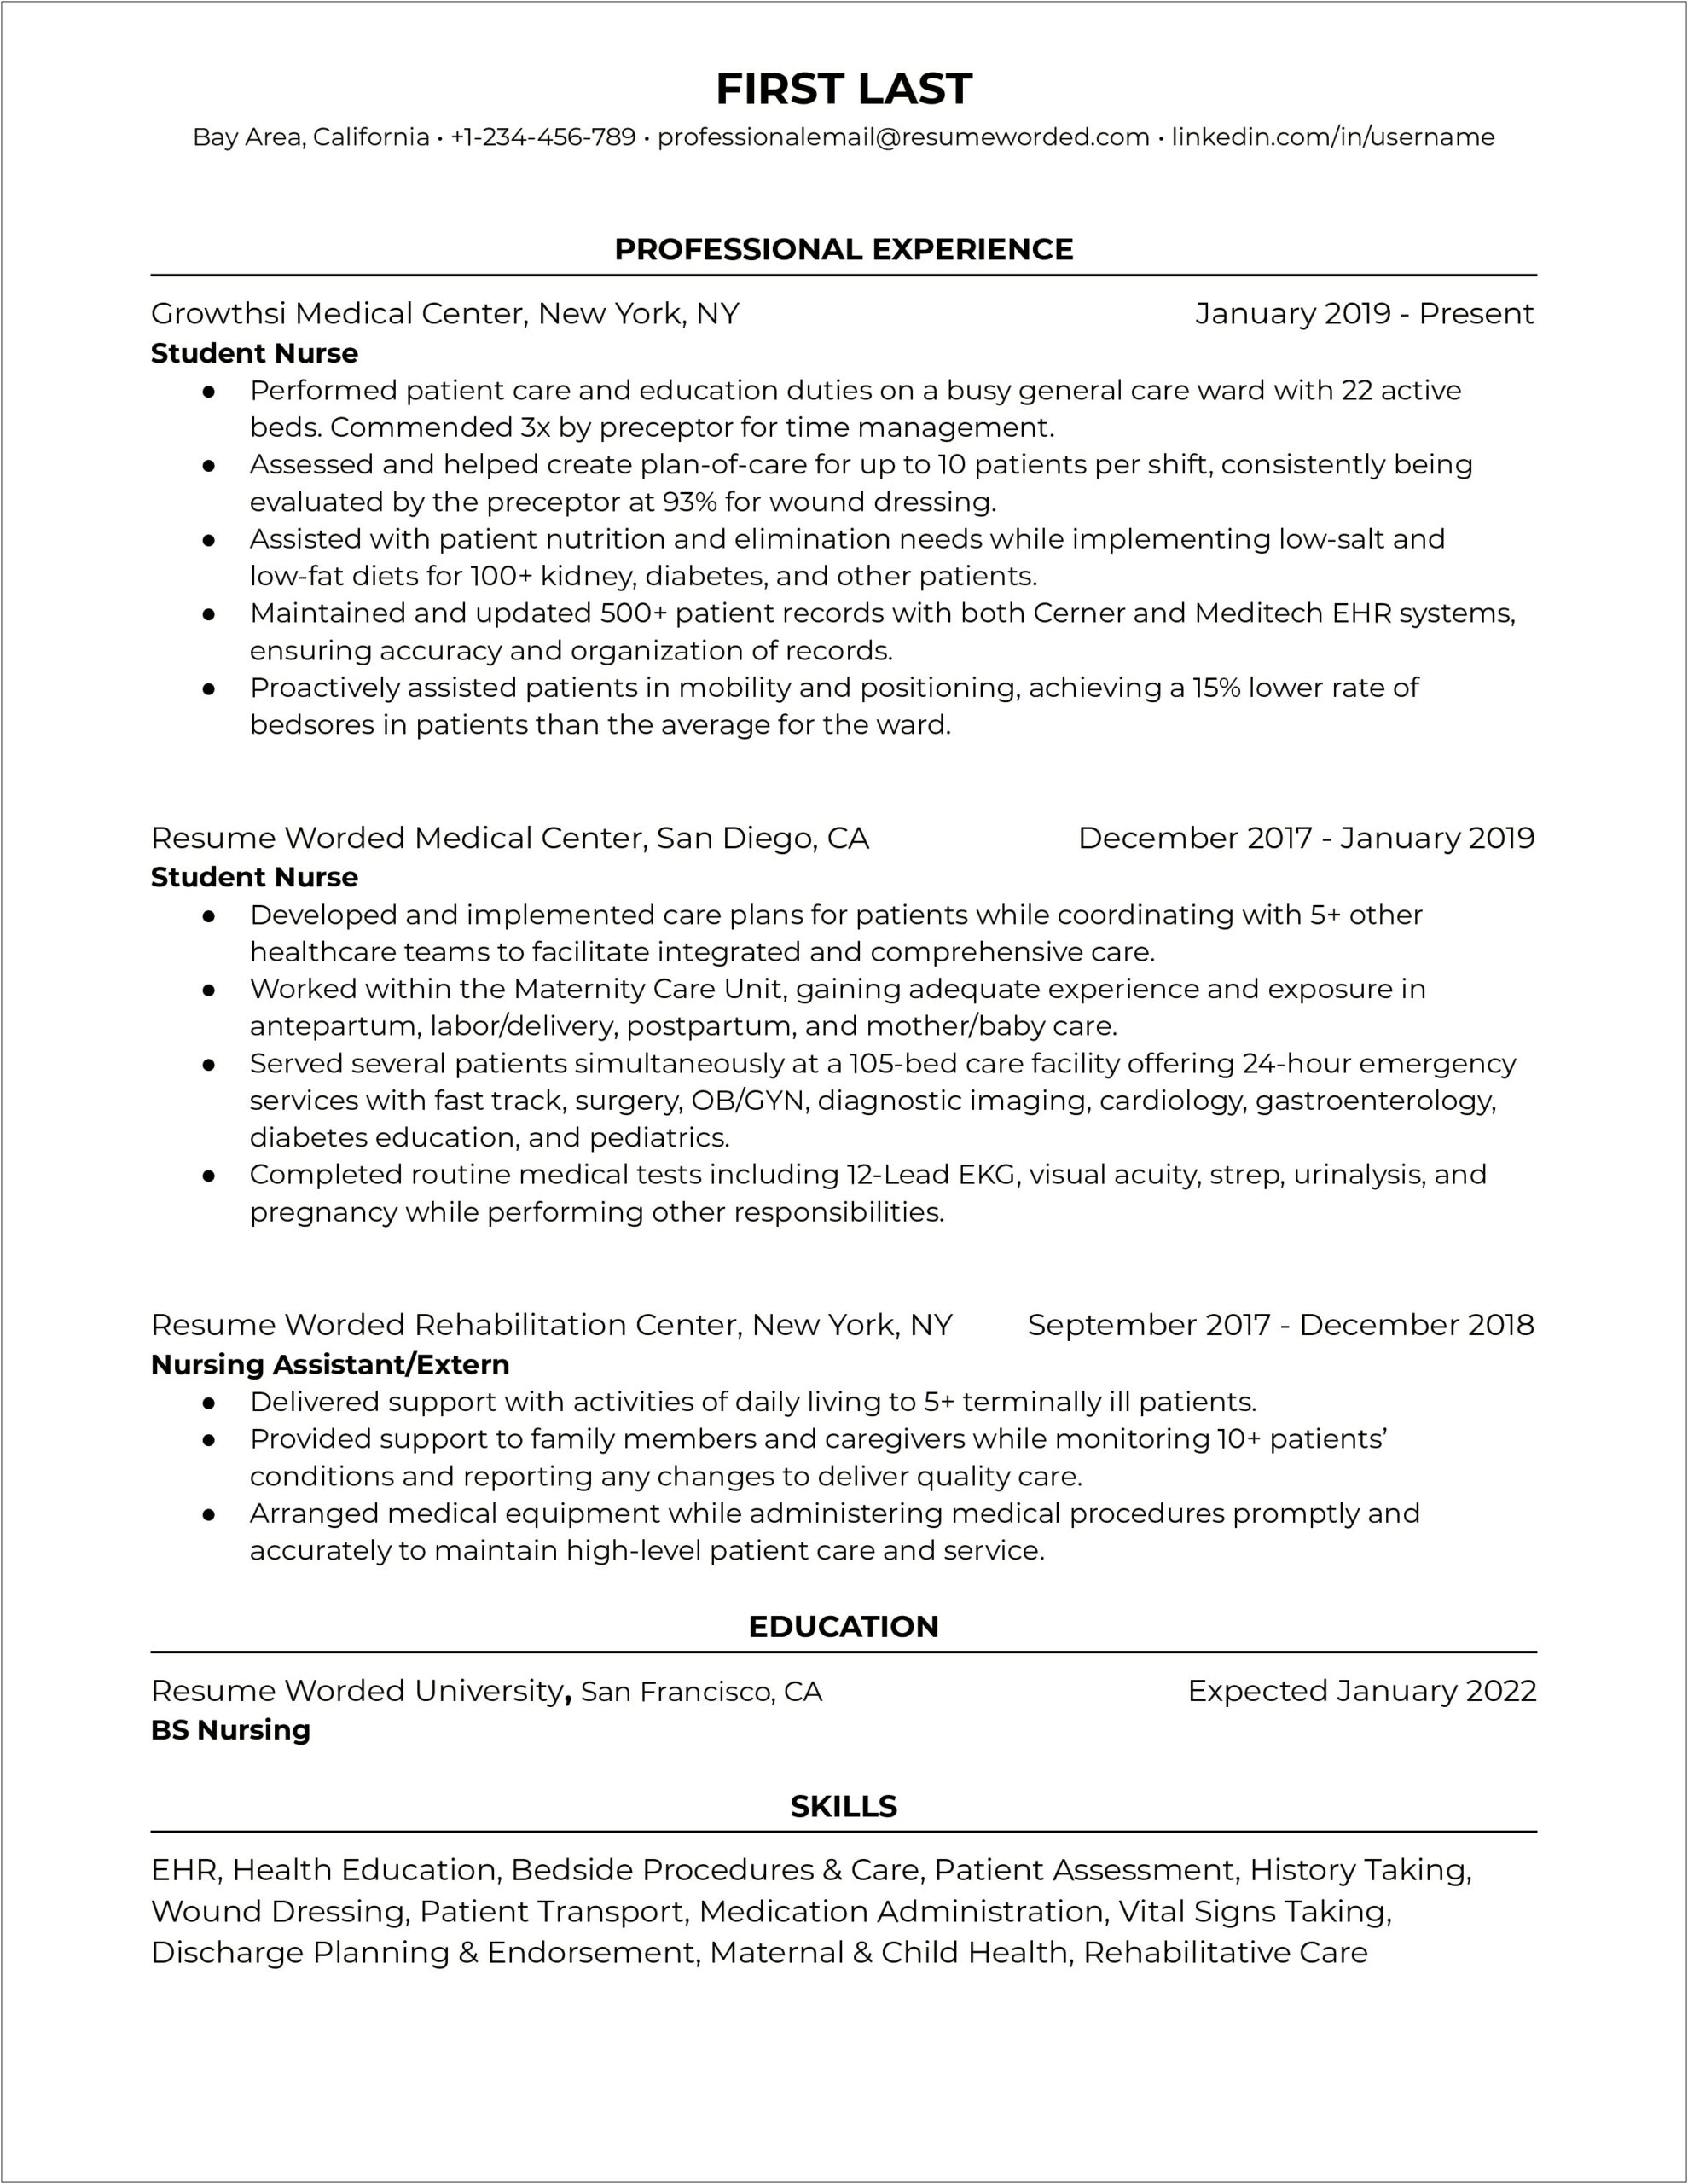 Nurse Practitioner Student Clinical Experience Resume